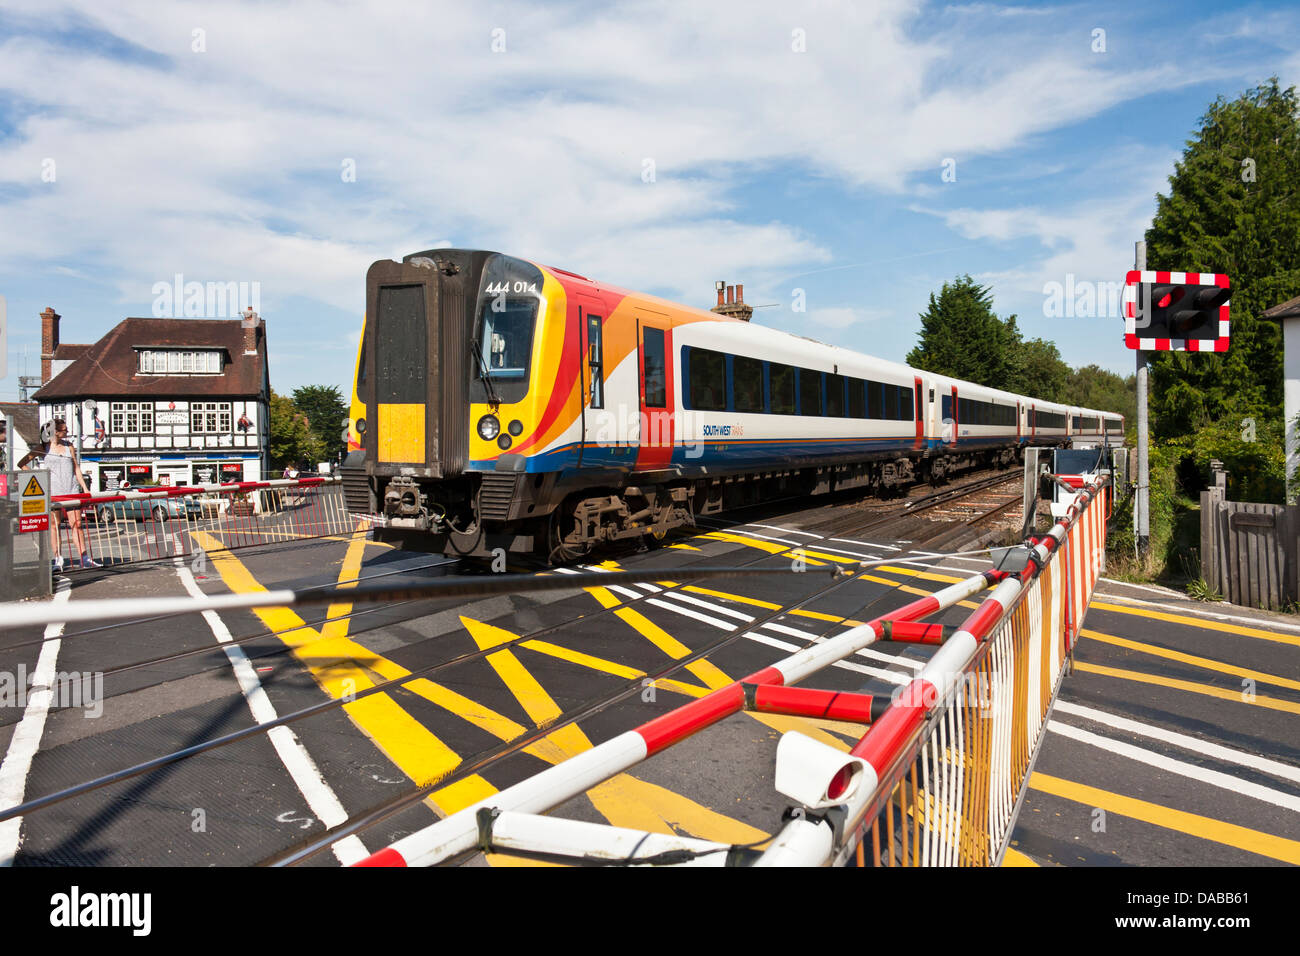 Barriers are down at an English level crossing as a train passes in the New Forest,.Brockenhurst, Hampshire, England, GB, UK Stock Photo